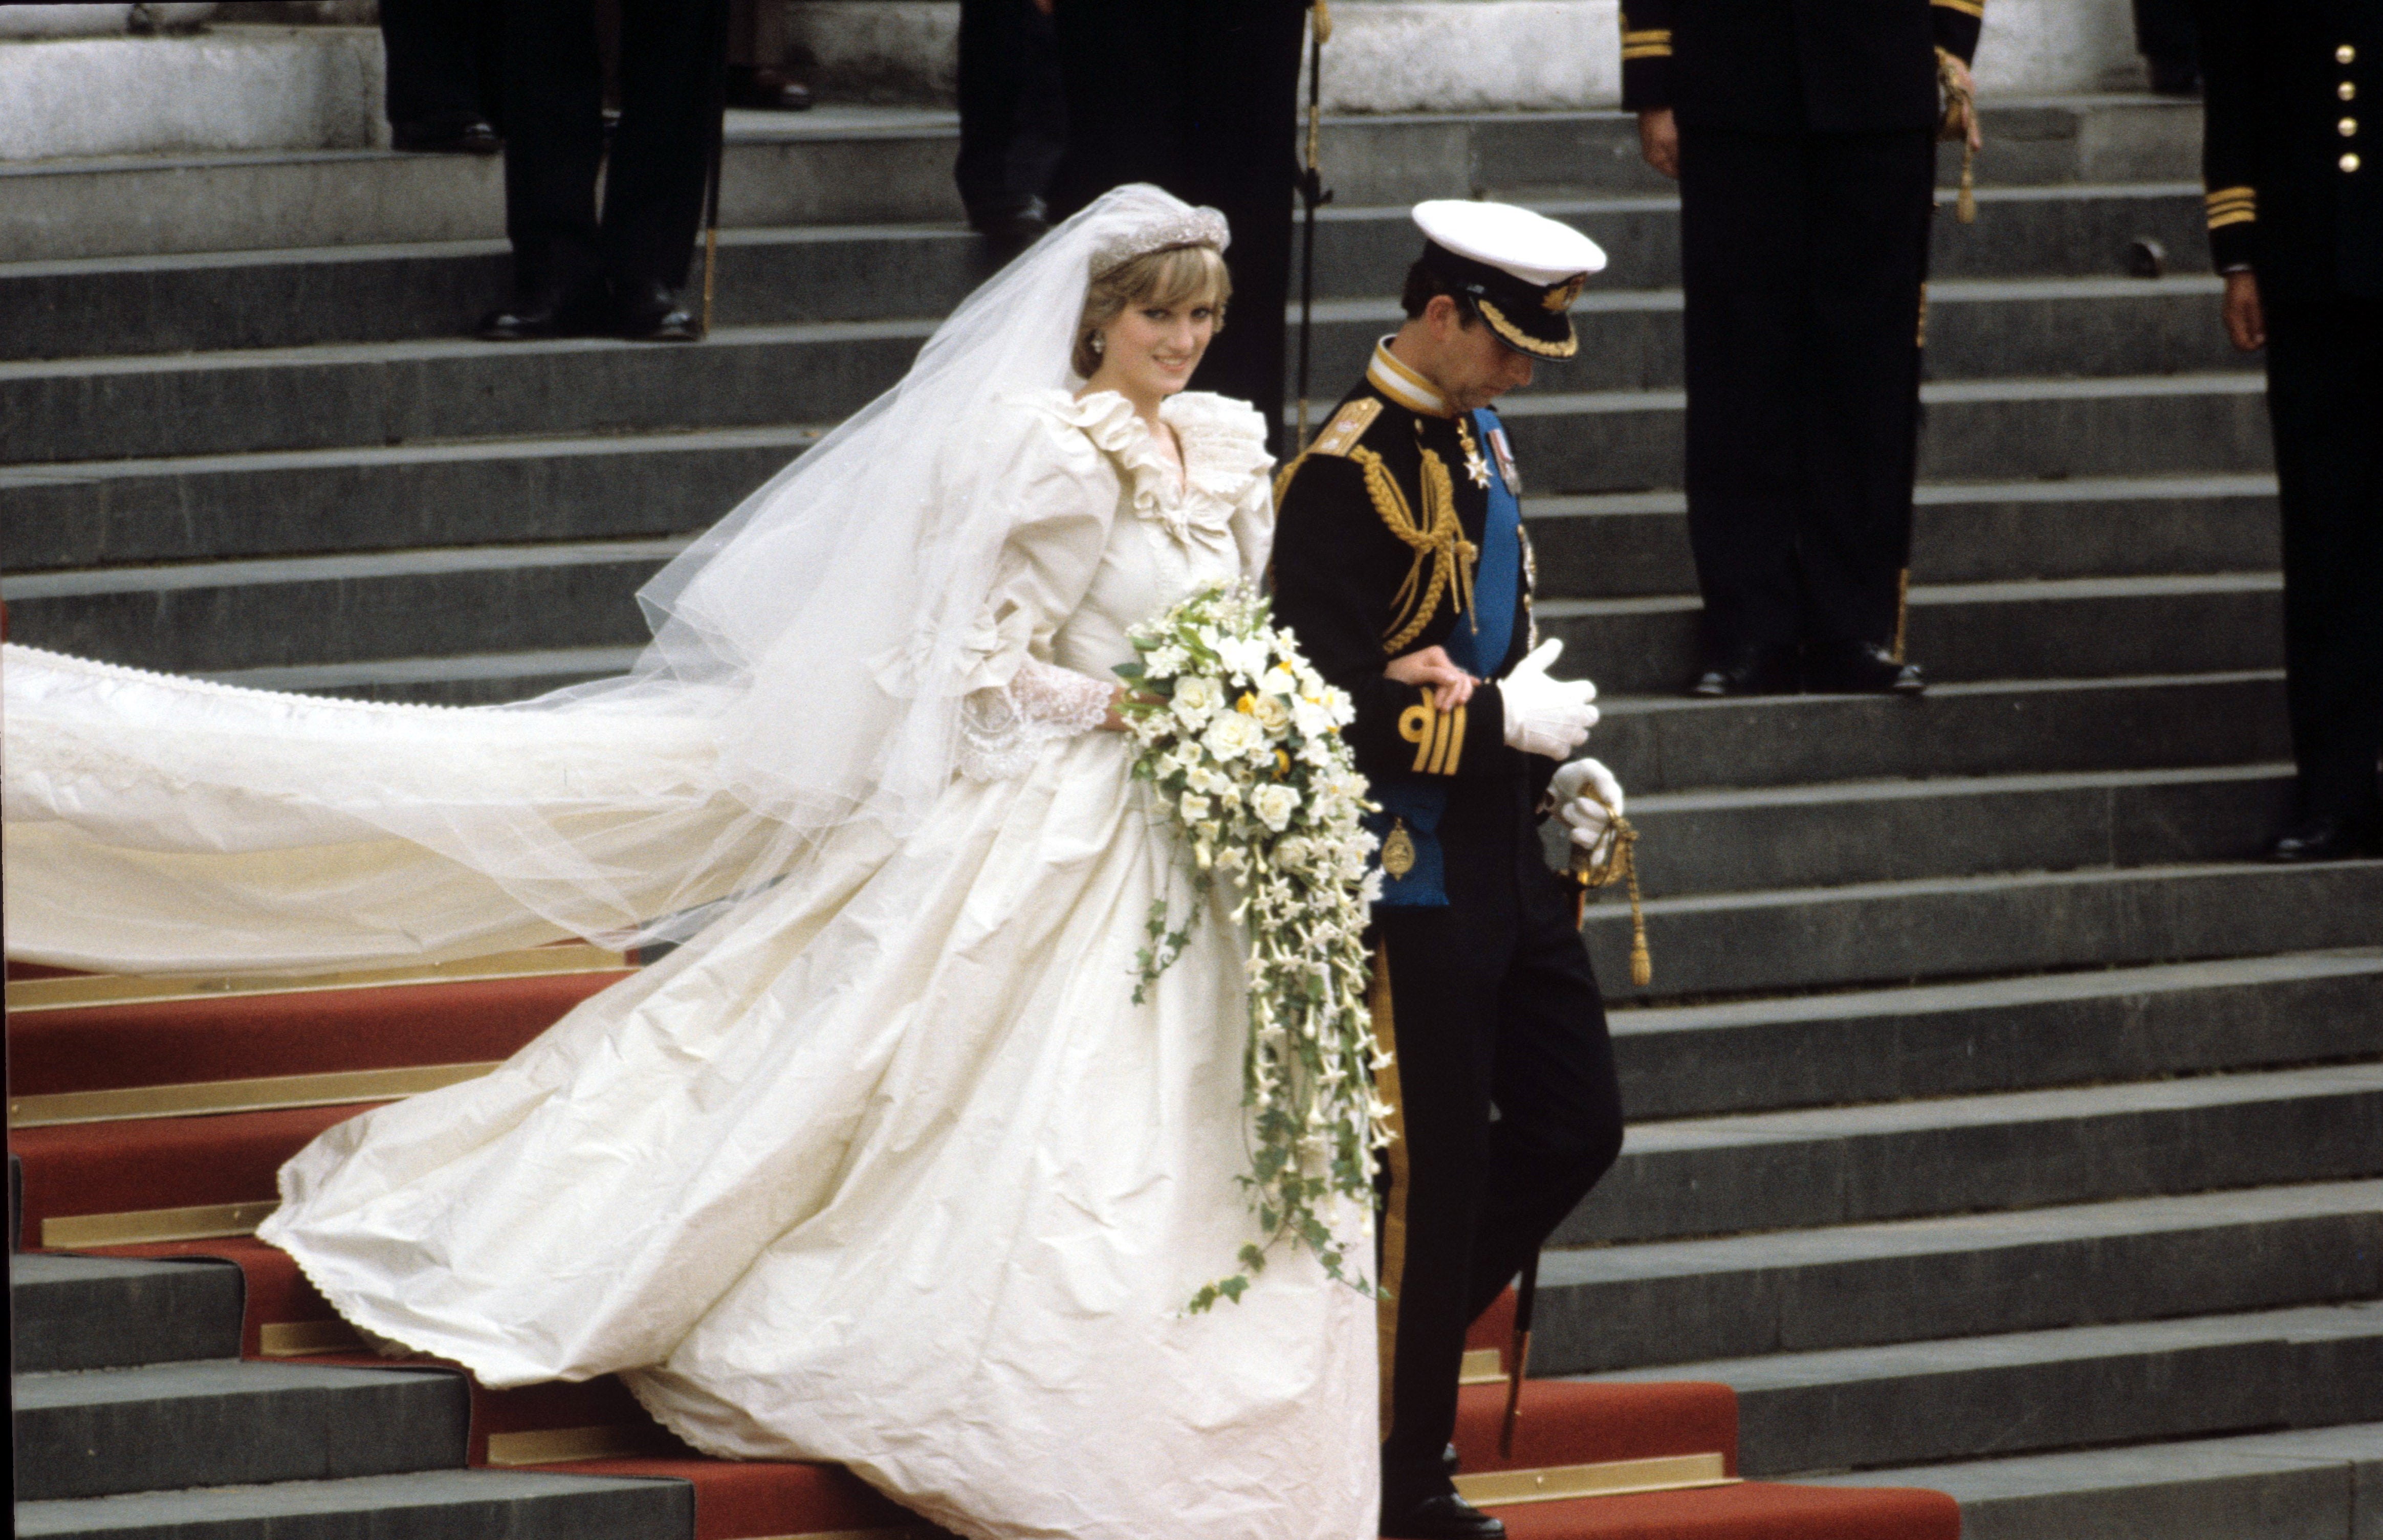 Princess Diana and Prince Charles on their wedding day in July 1981. The gown was designed by David and Elizabeth Emanuel and has a fitted bodice covered in panels of antique Carrickmacross lace. It originally belonging to Prince Charles’ great grandmother Queen Mary. It also features a 25-foot long train - the longest in royal history. The actor Emma Corrin wore a replica of the gown for the fourth series of The Crown , in which she portrayed Diana.